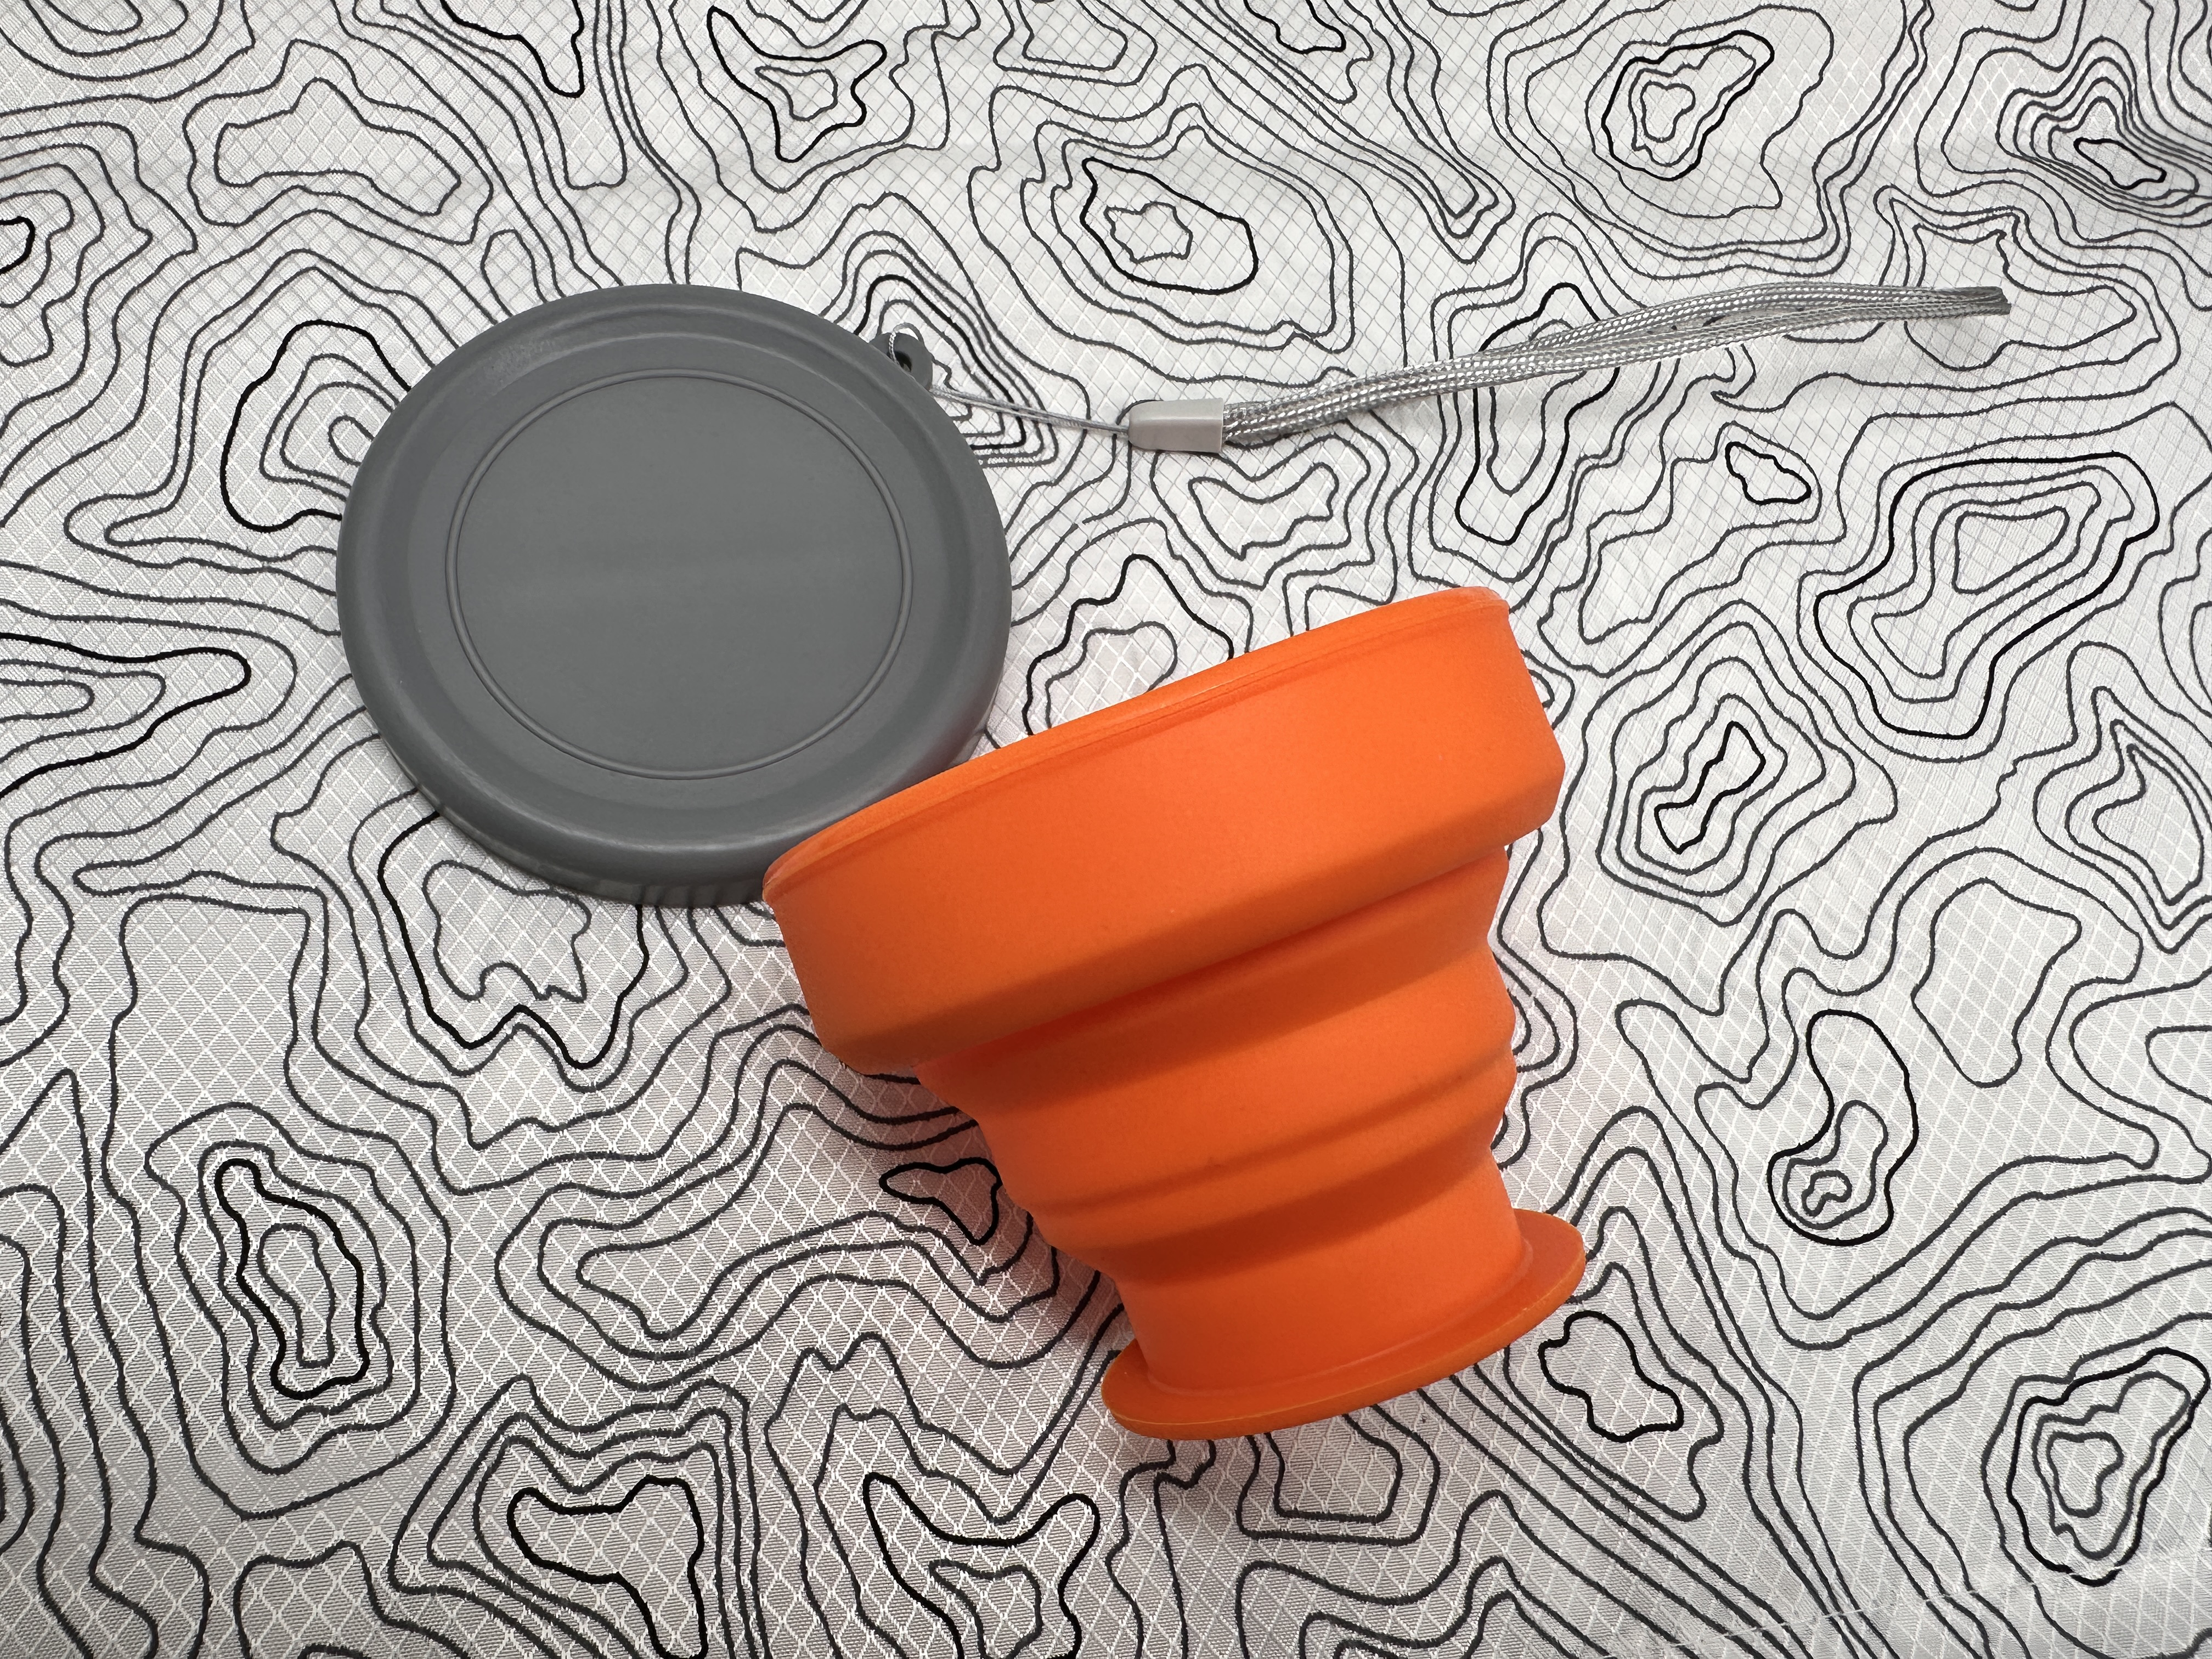 Sip N Squish Collapsible Cup